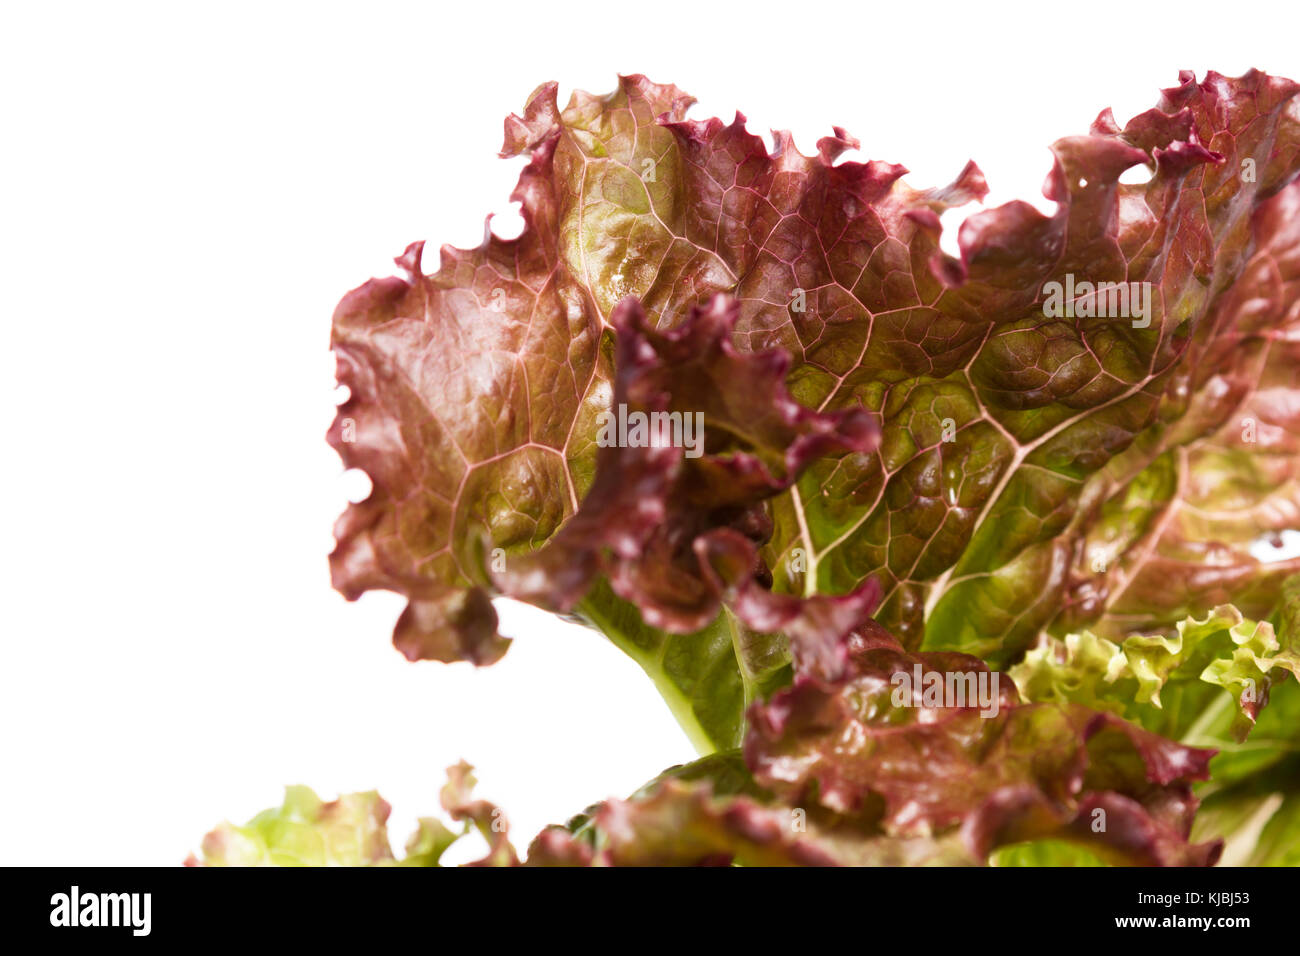 red leaf lettuce isolated on a white background Stock Photo